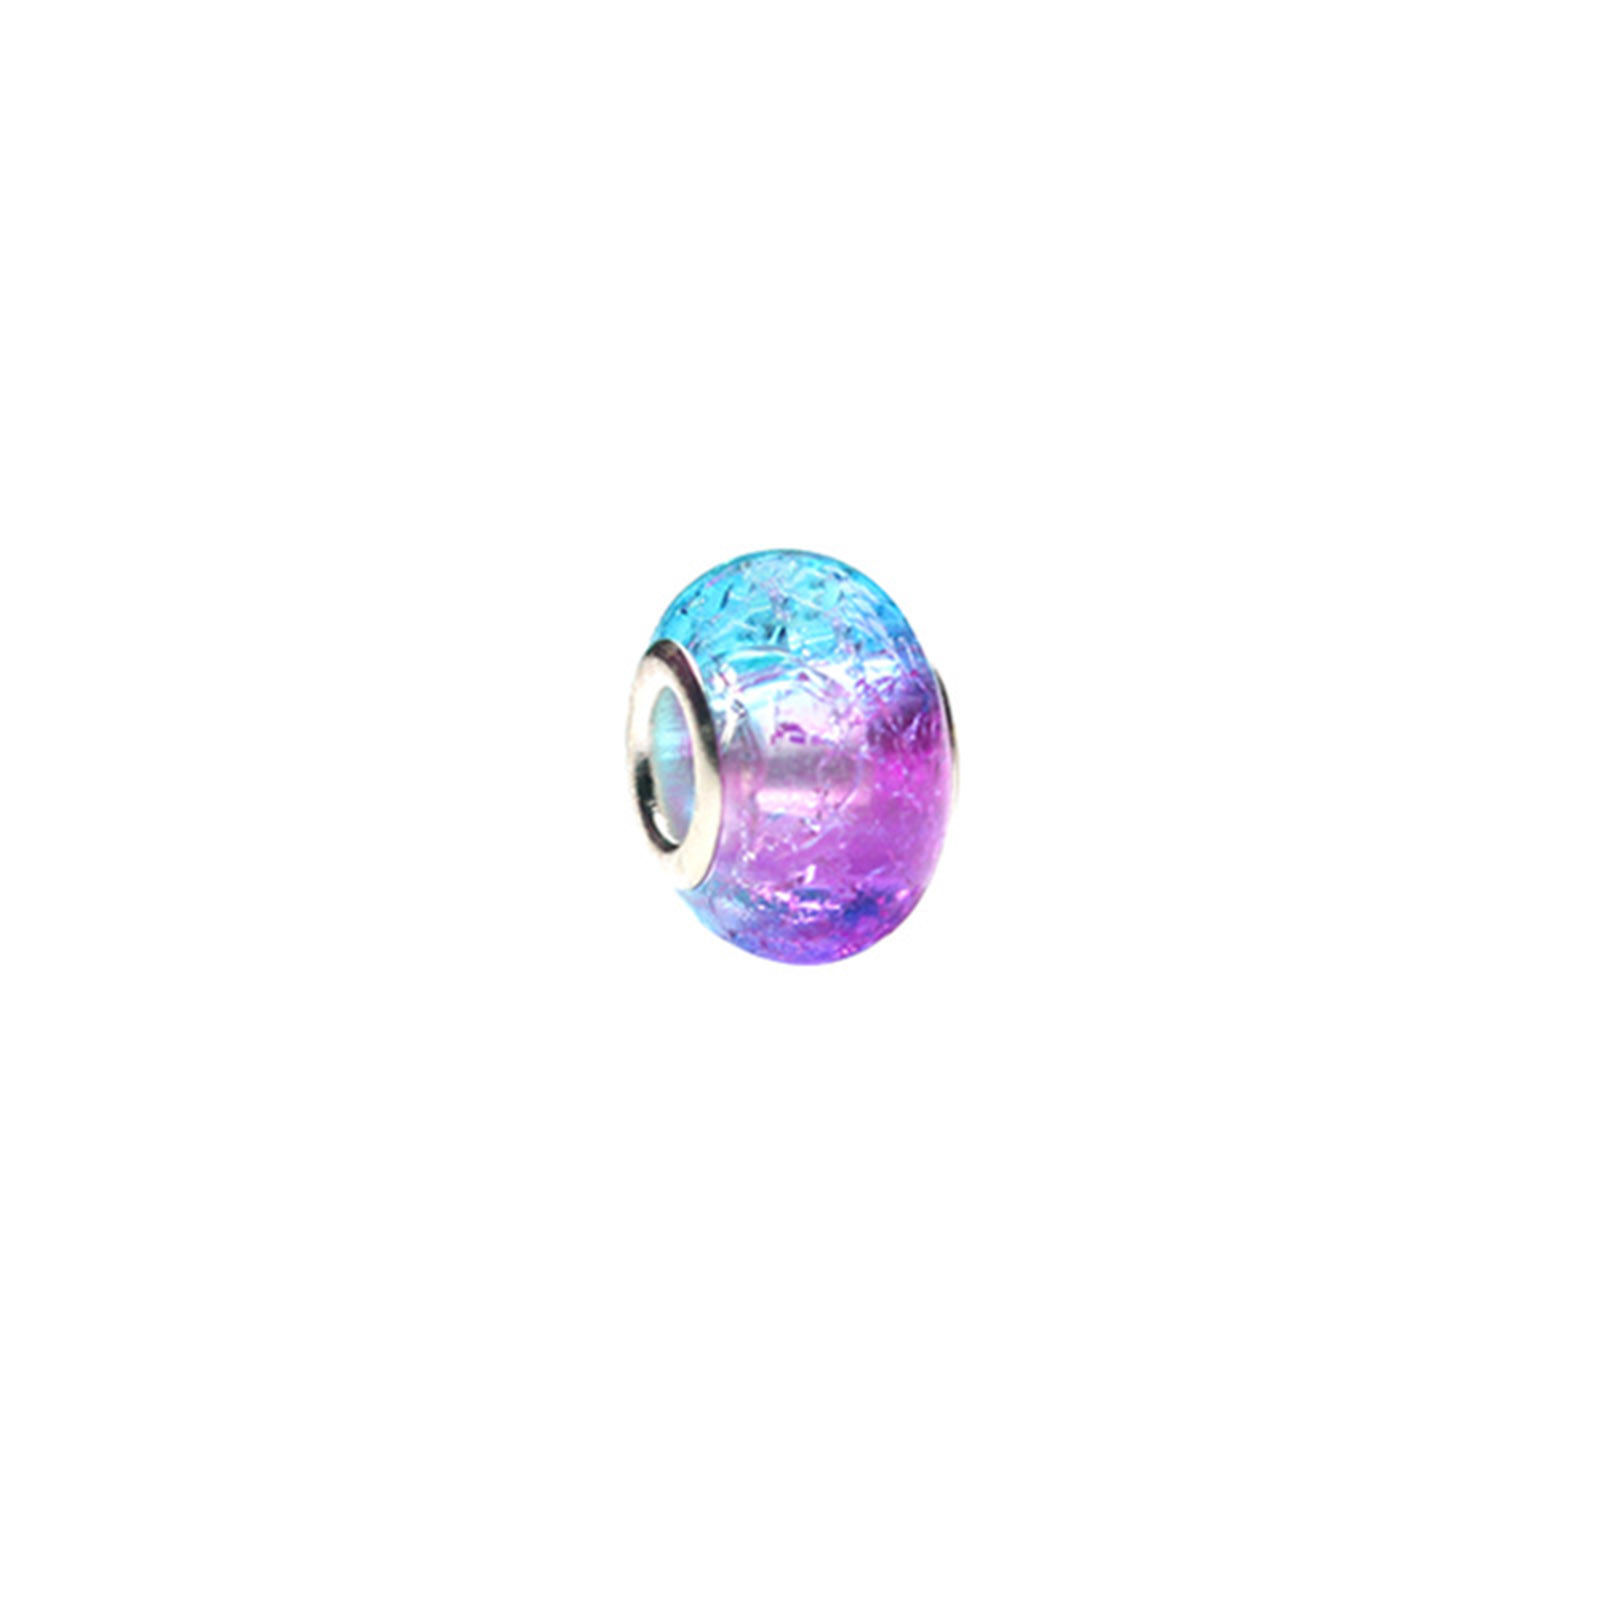 Picture of Resin European Style Large Hole Charm Beads Blue & Fuchsia Round Crack Gradient Color 14mm Dia., Hole: Approx 5mm, 20 PCs